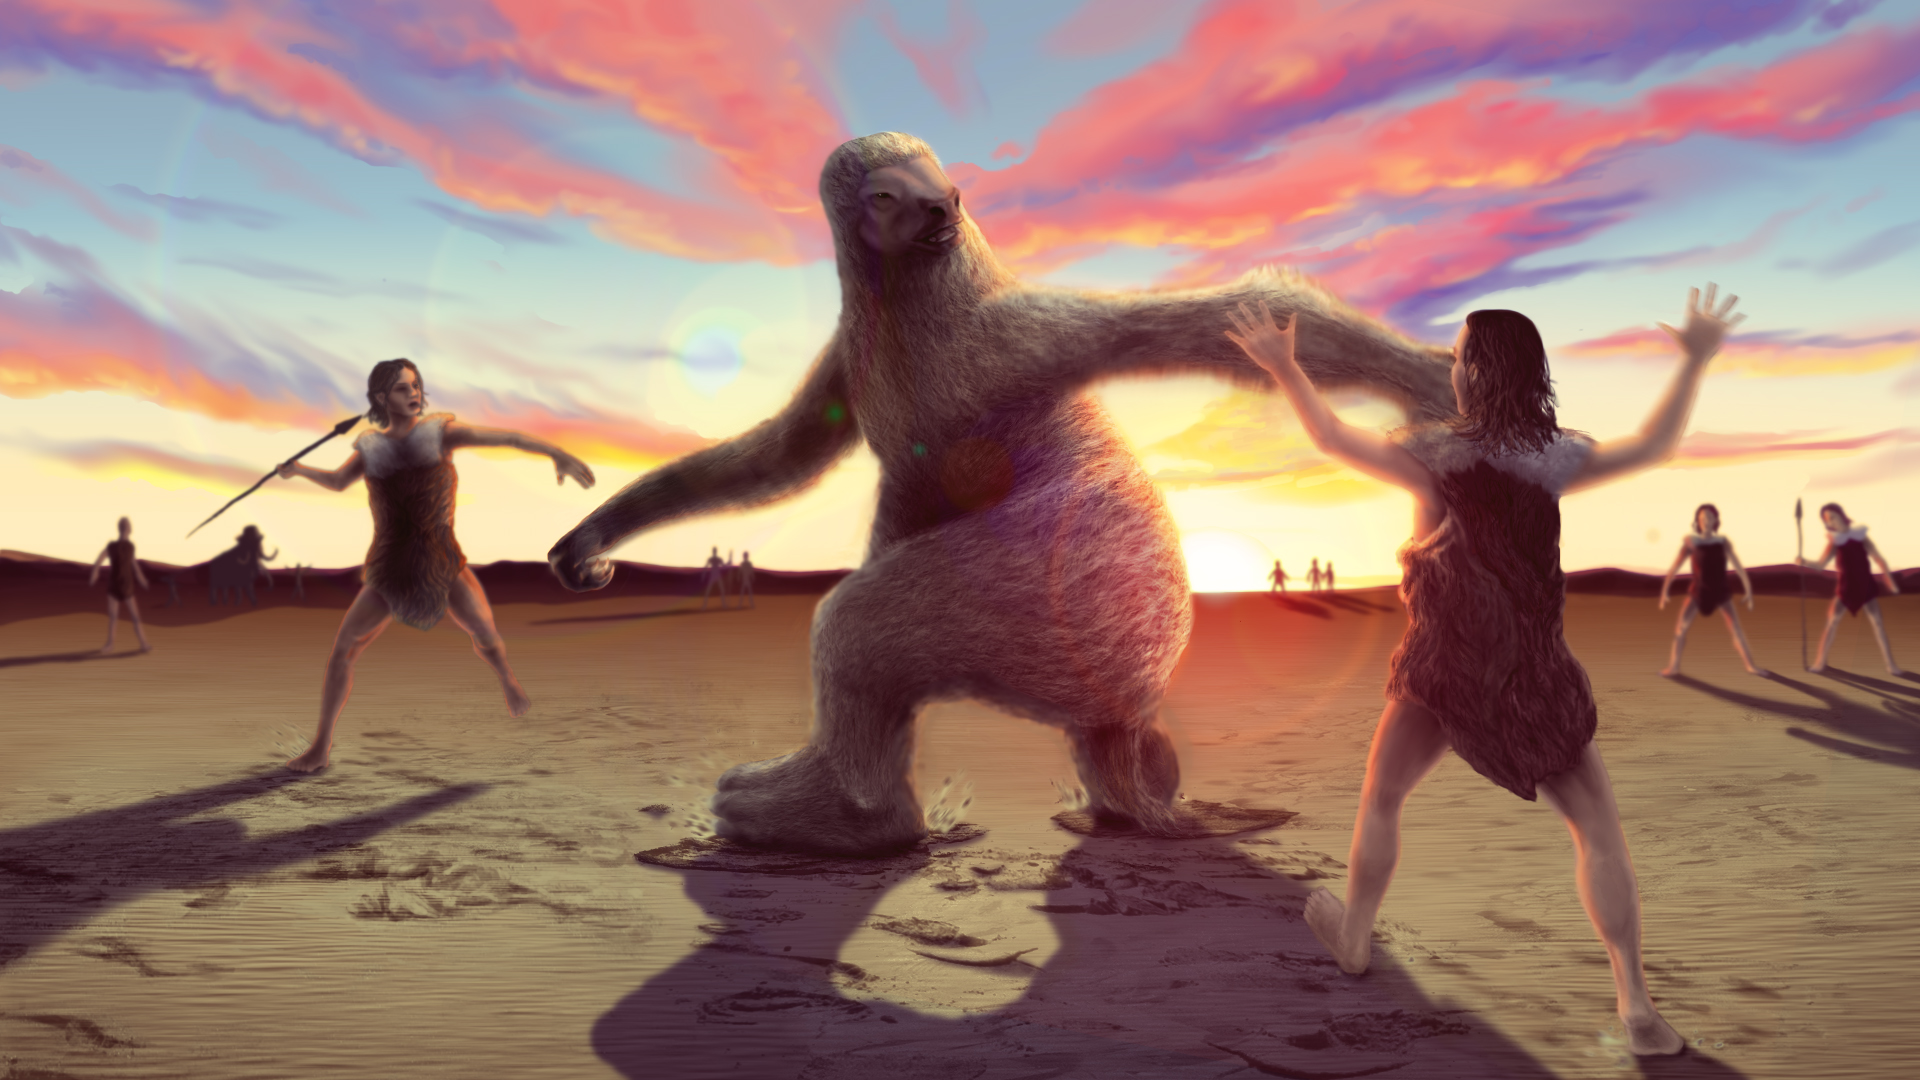 An artist's rendering represents a possible interaction between humans and a giant ground sloth. Professor emeritus P. Willey was provided expertise into findings of prehistoric footprints in White Sands National Monument. in New Mexico.